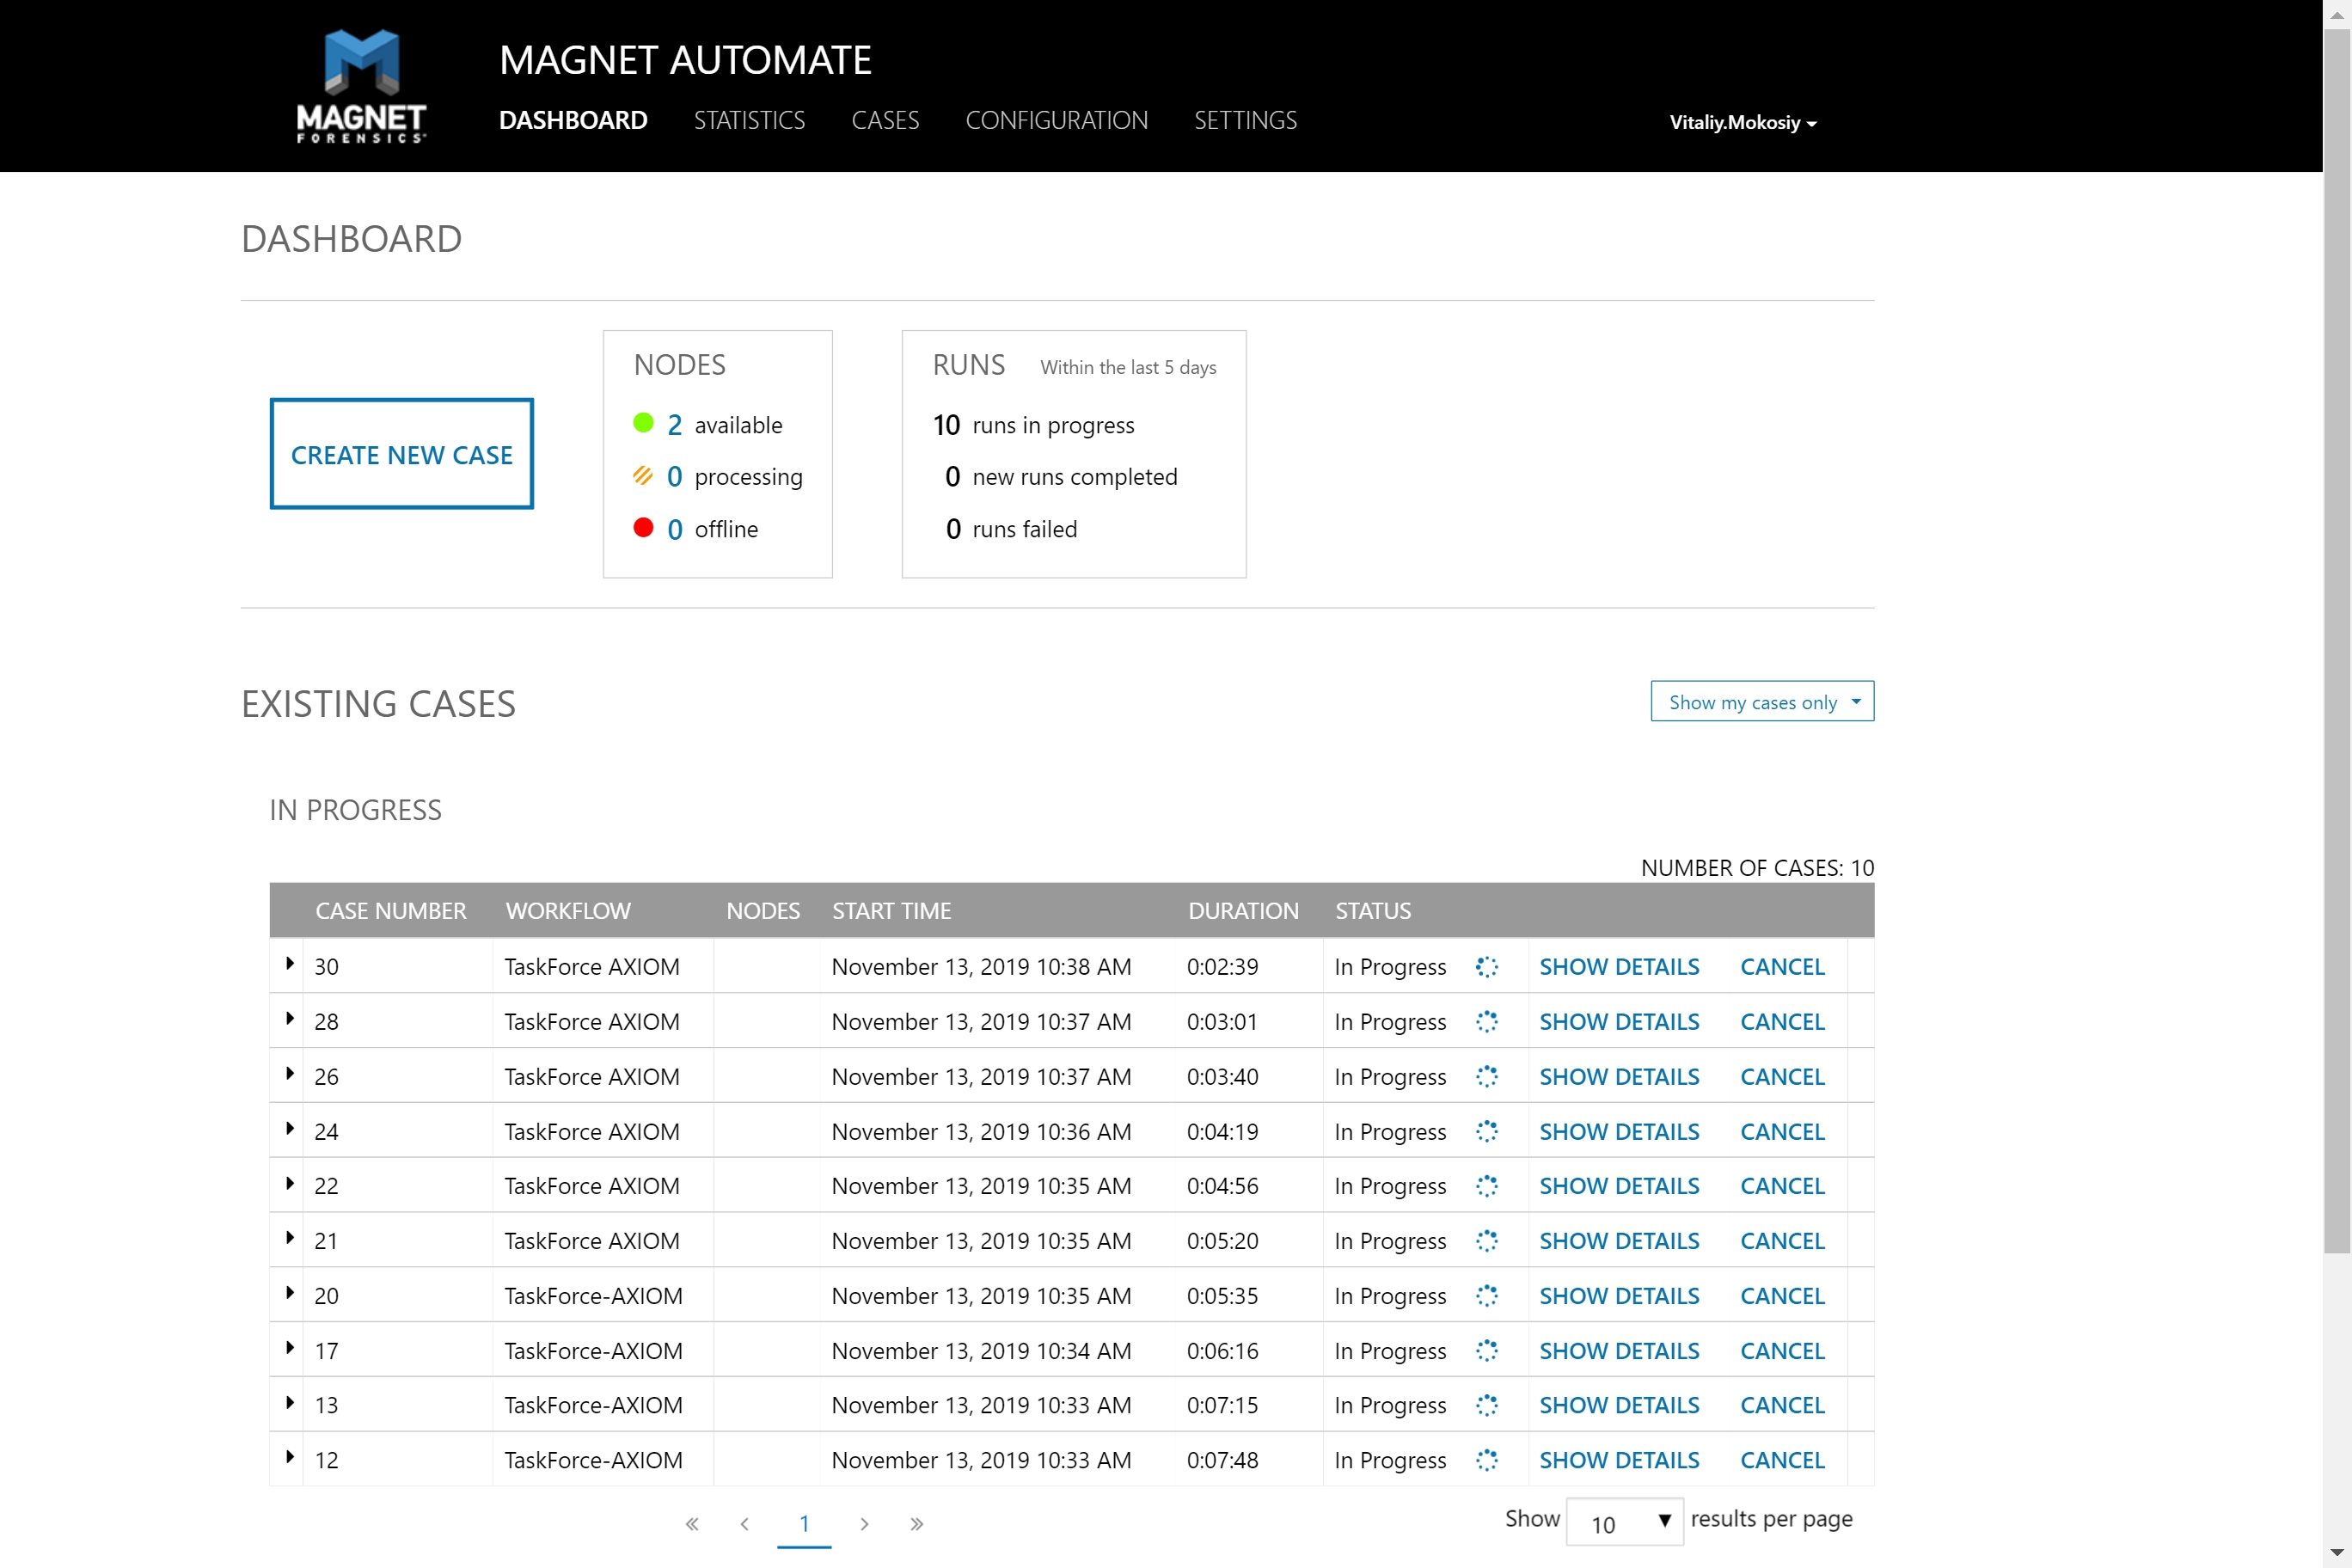 Magnet AUTOMATE dashboard